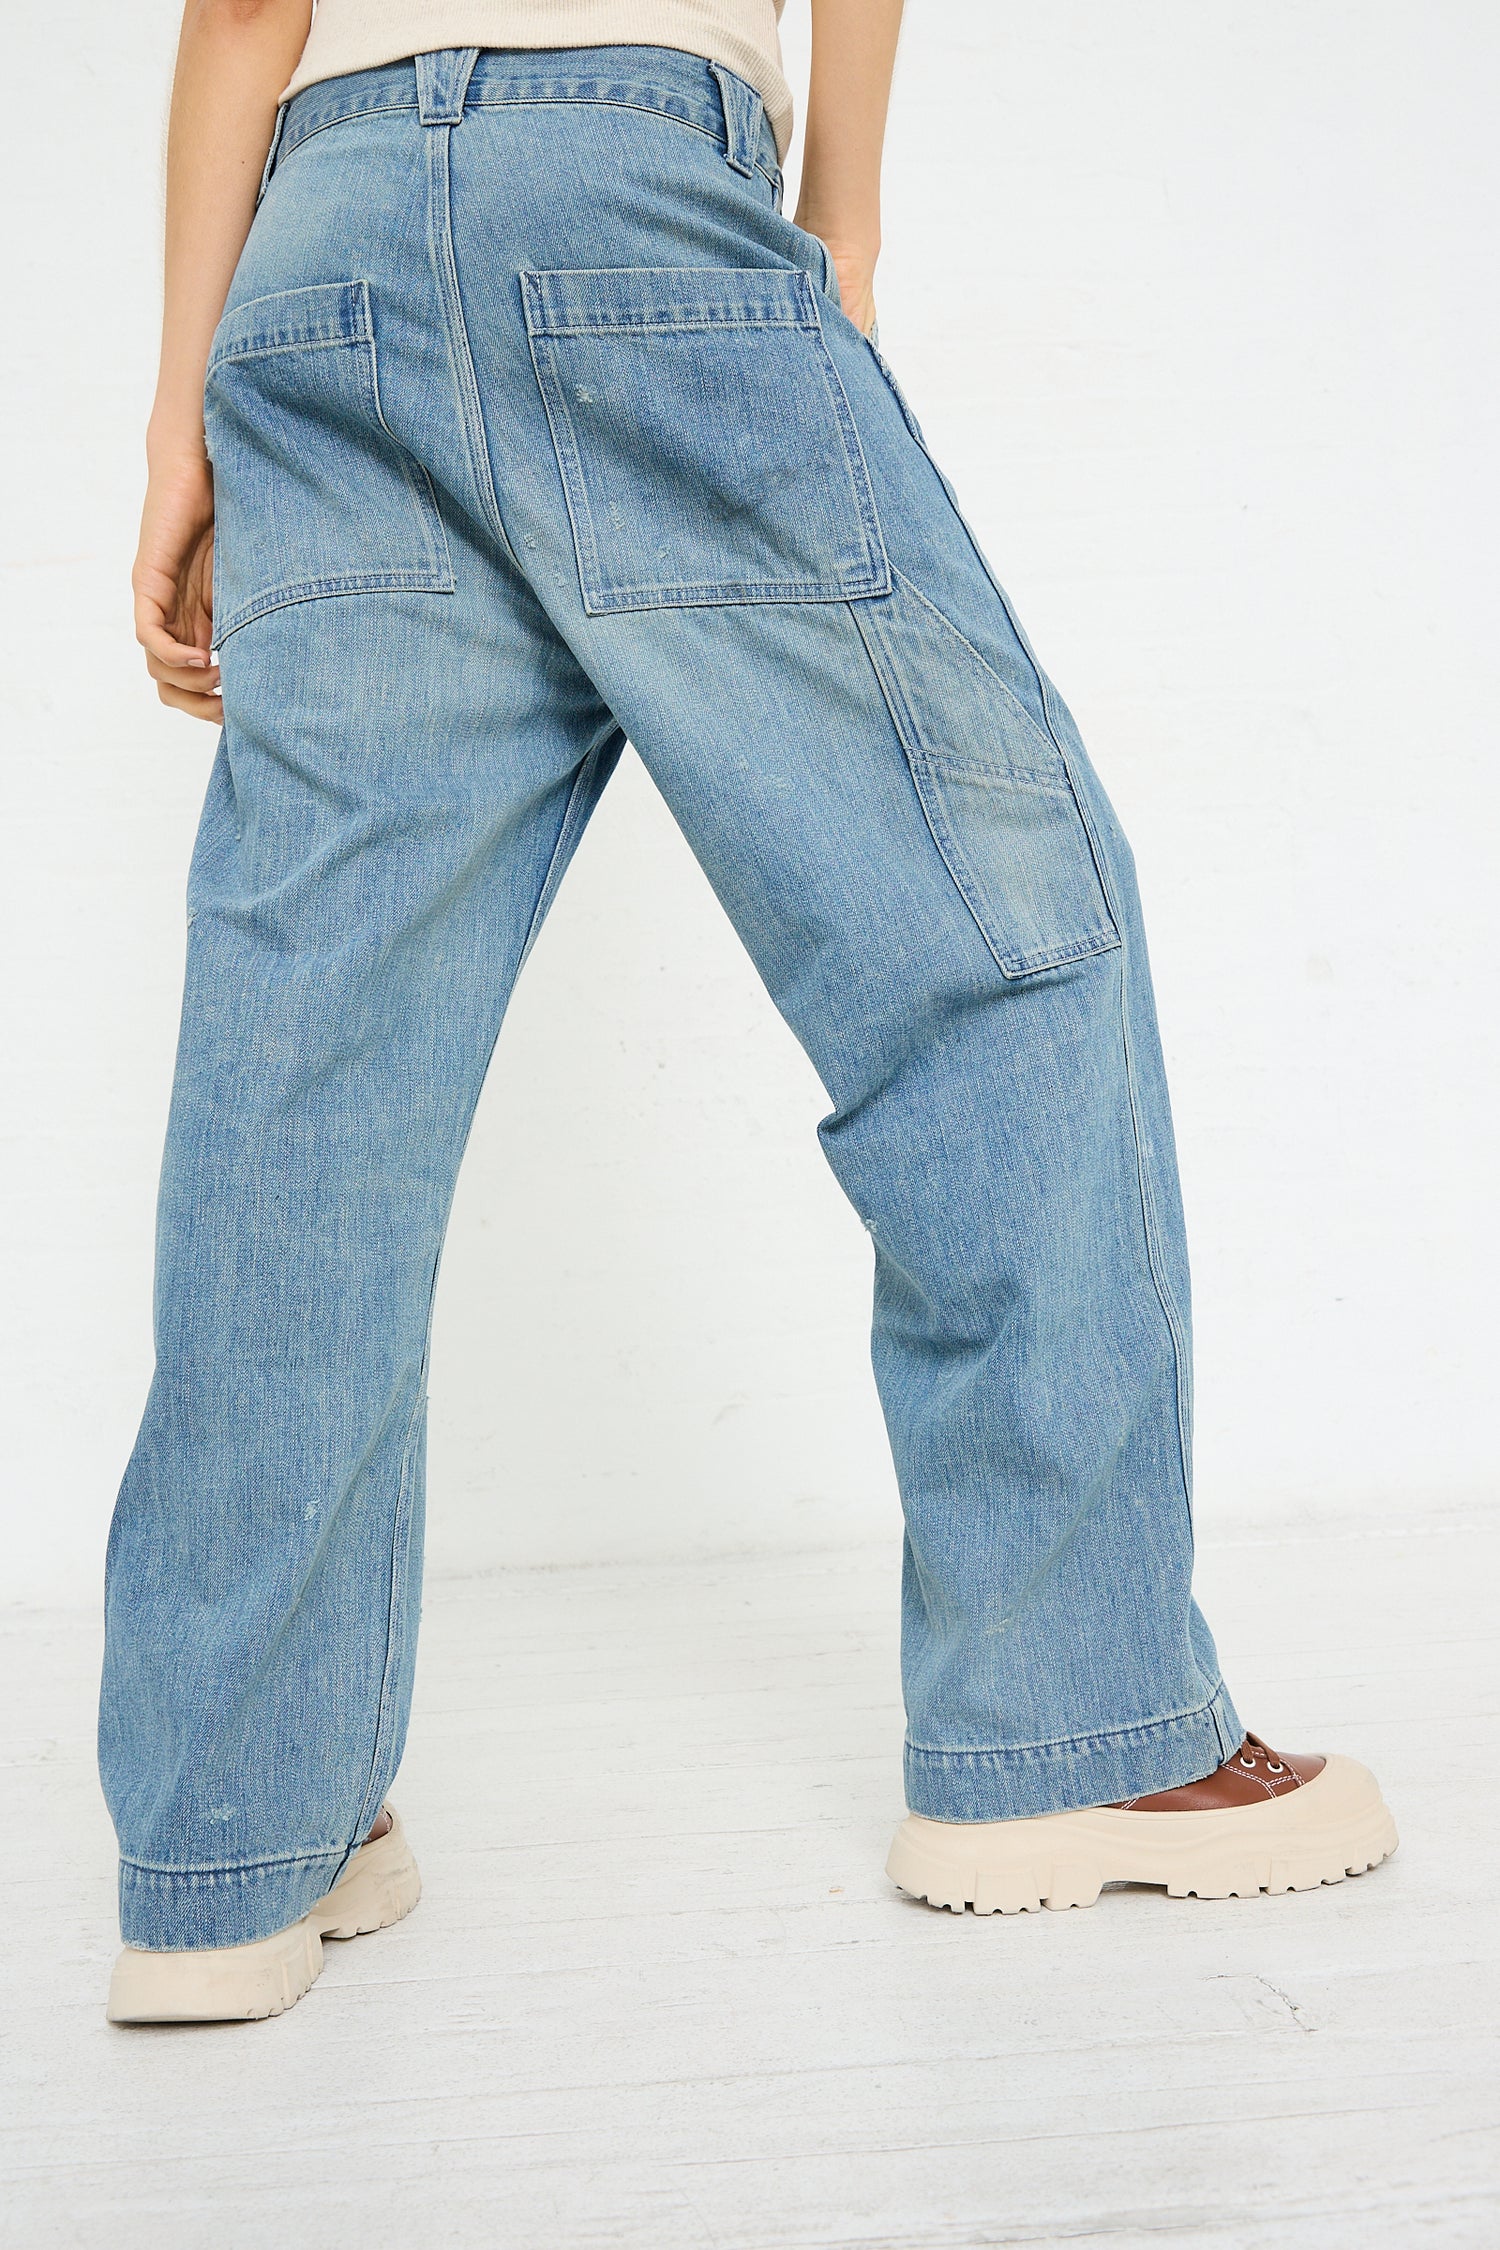 Person wearing Chimala Denim Painter Pant in Vintage Wash and beige shoes.